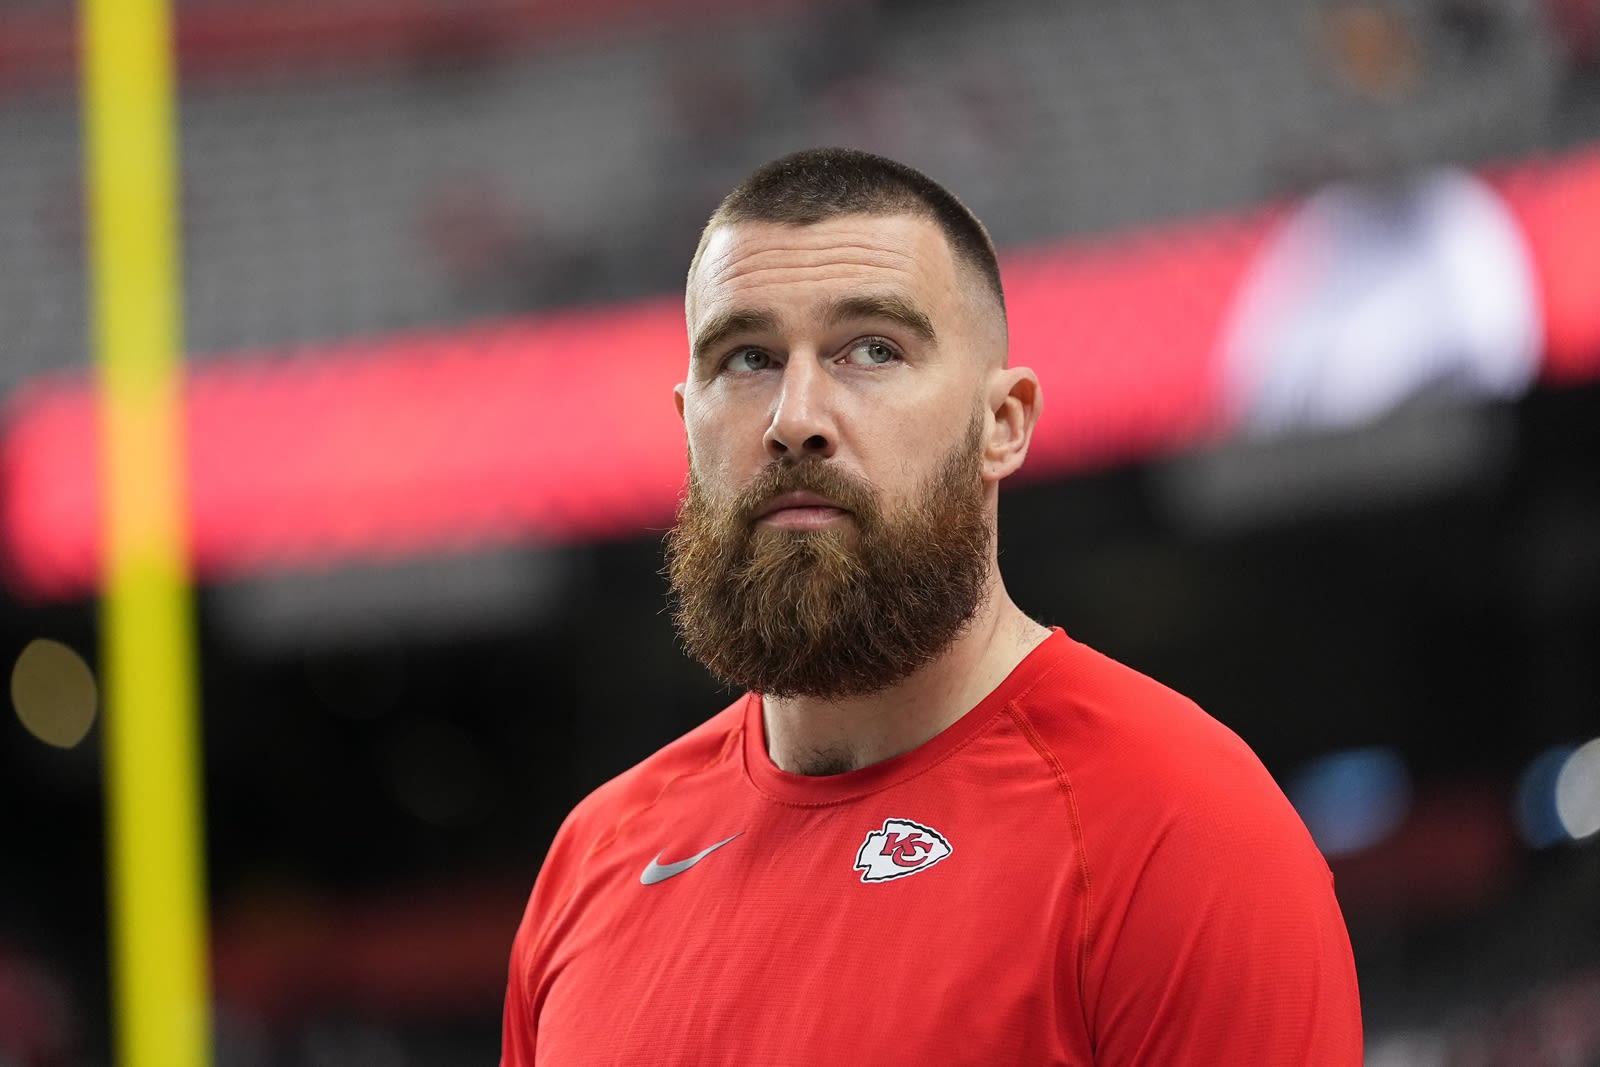 Travis Kelce becomes highest paid tight end in NFL after new $34.25M contract, rep says